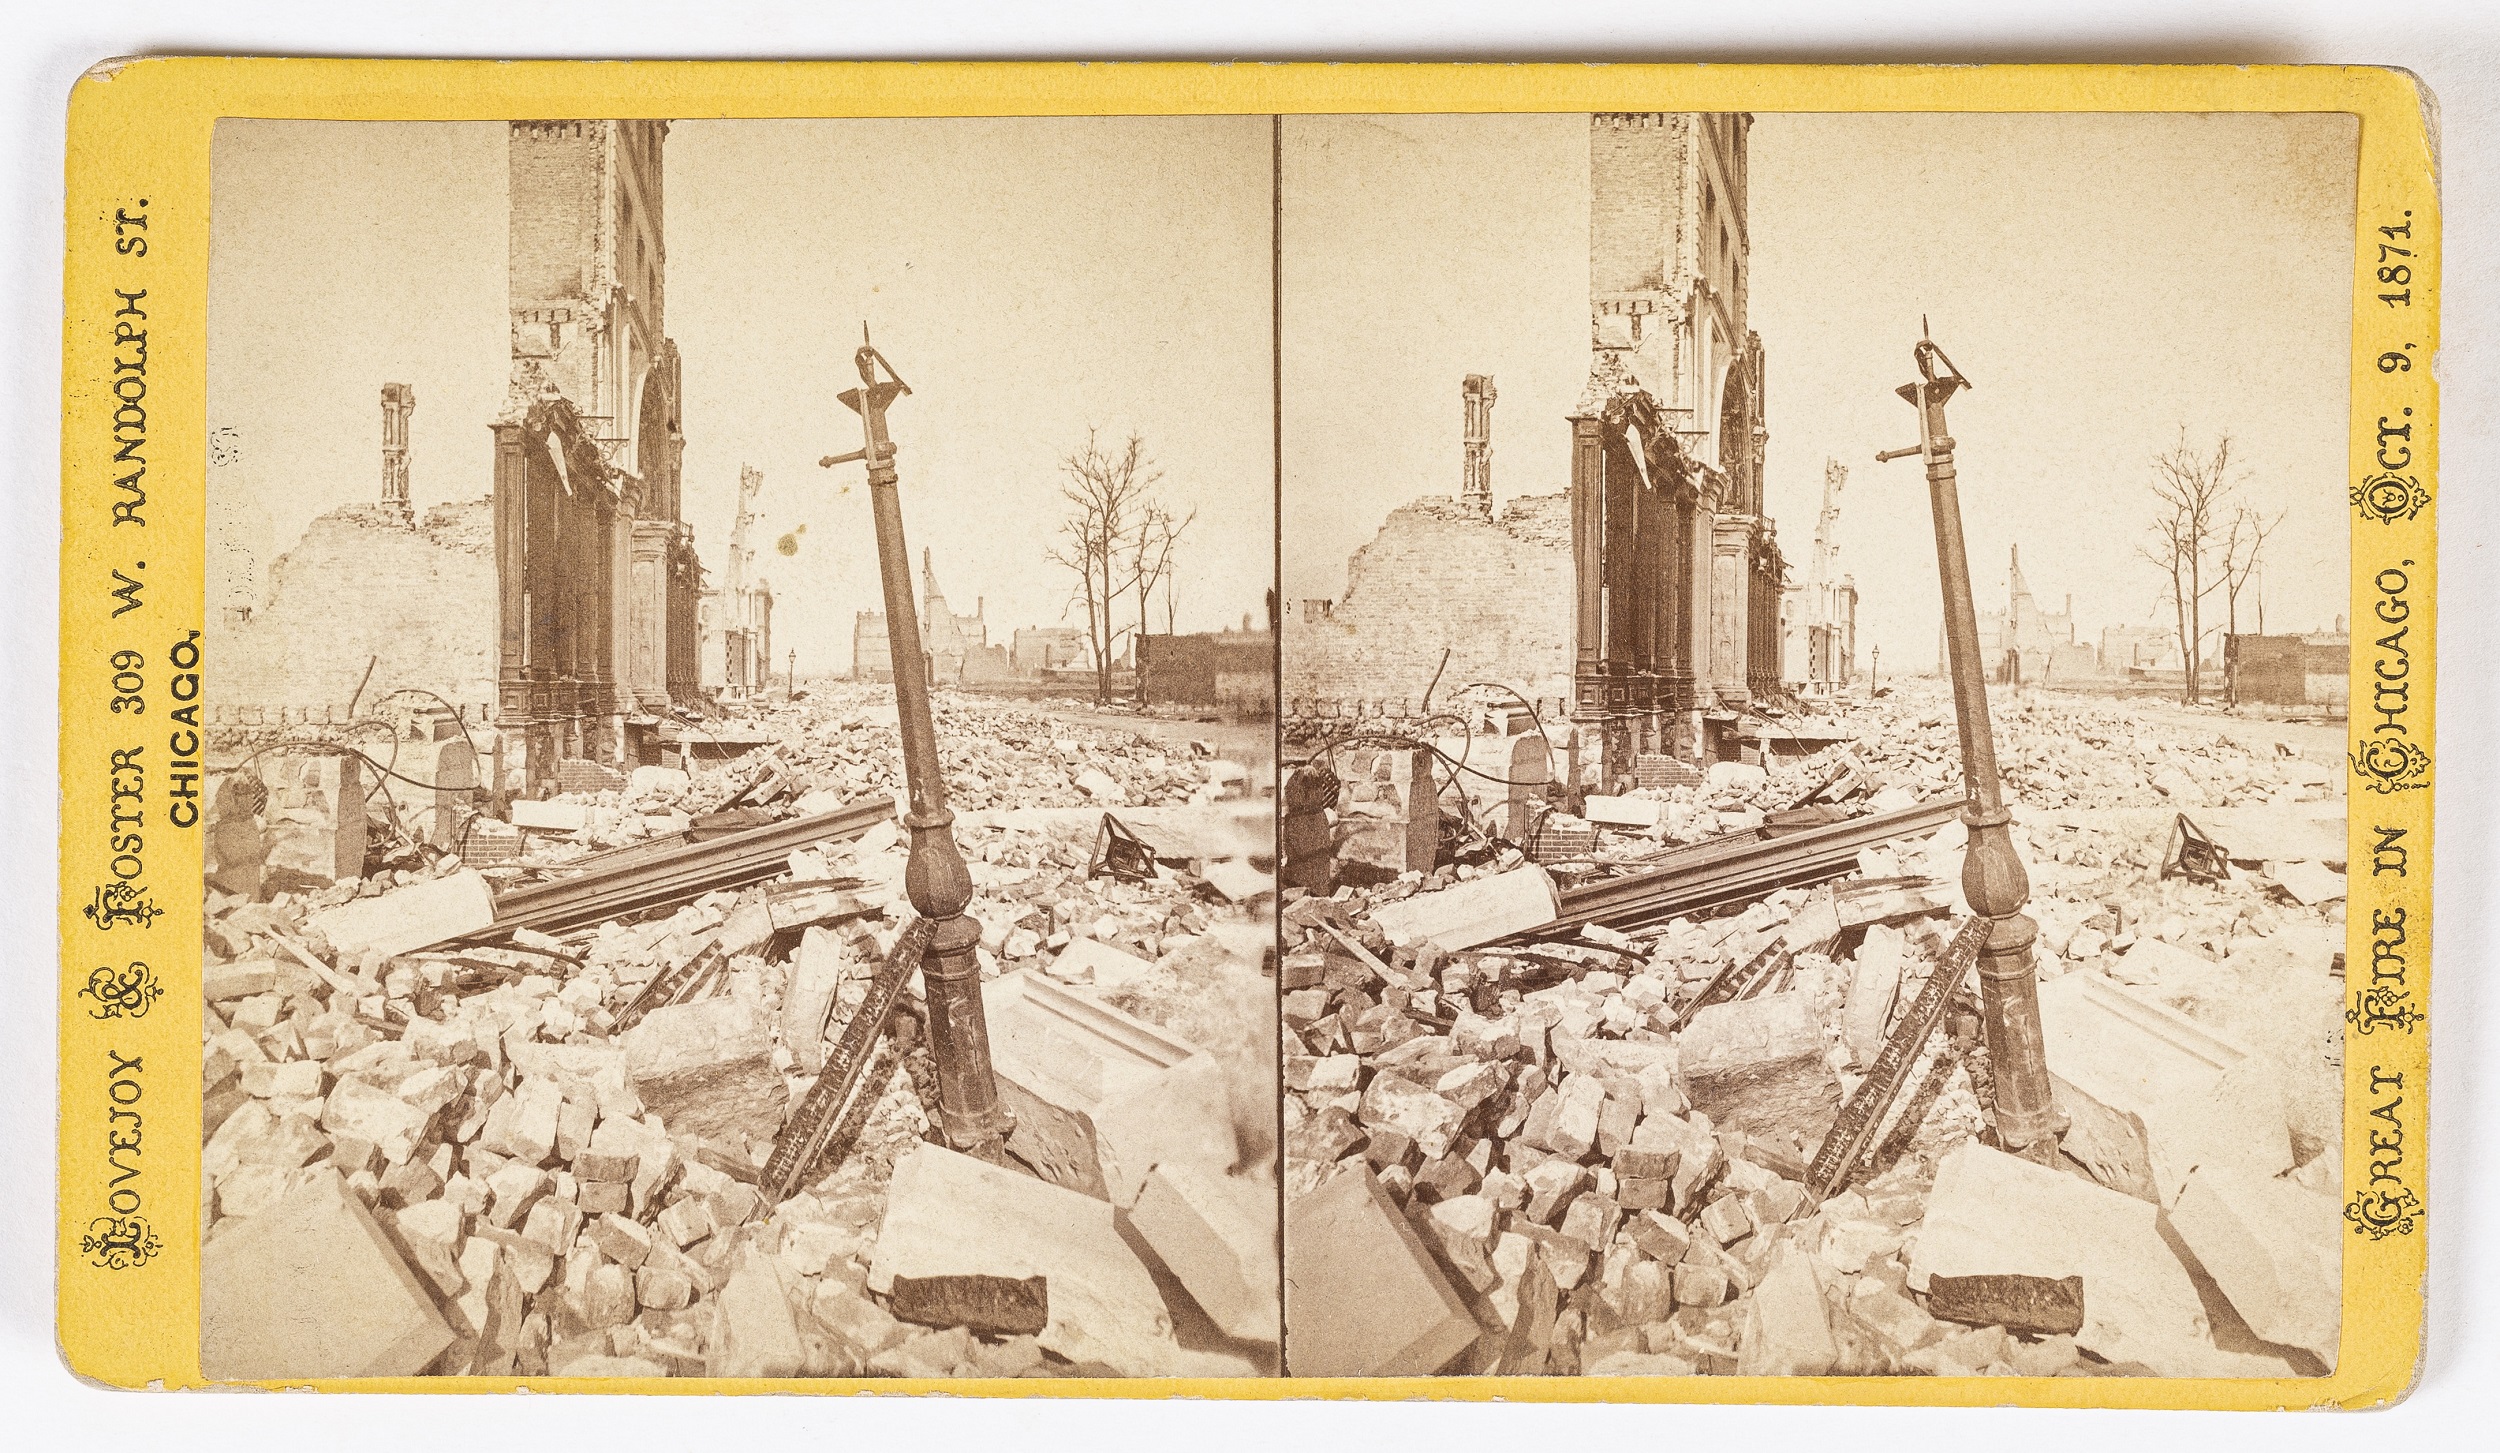 Photographic stereoview of building ruined by fire